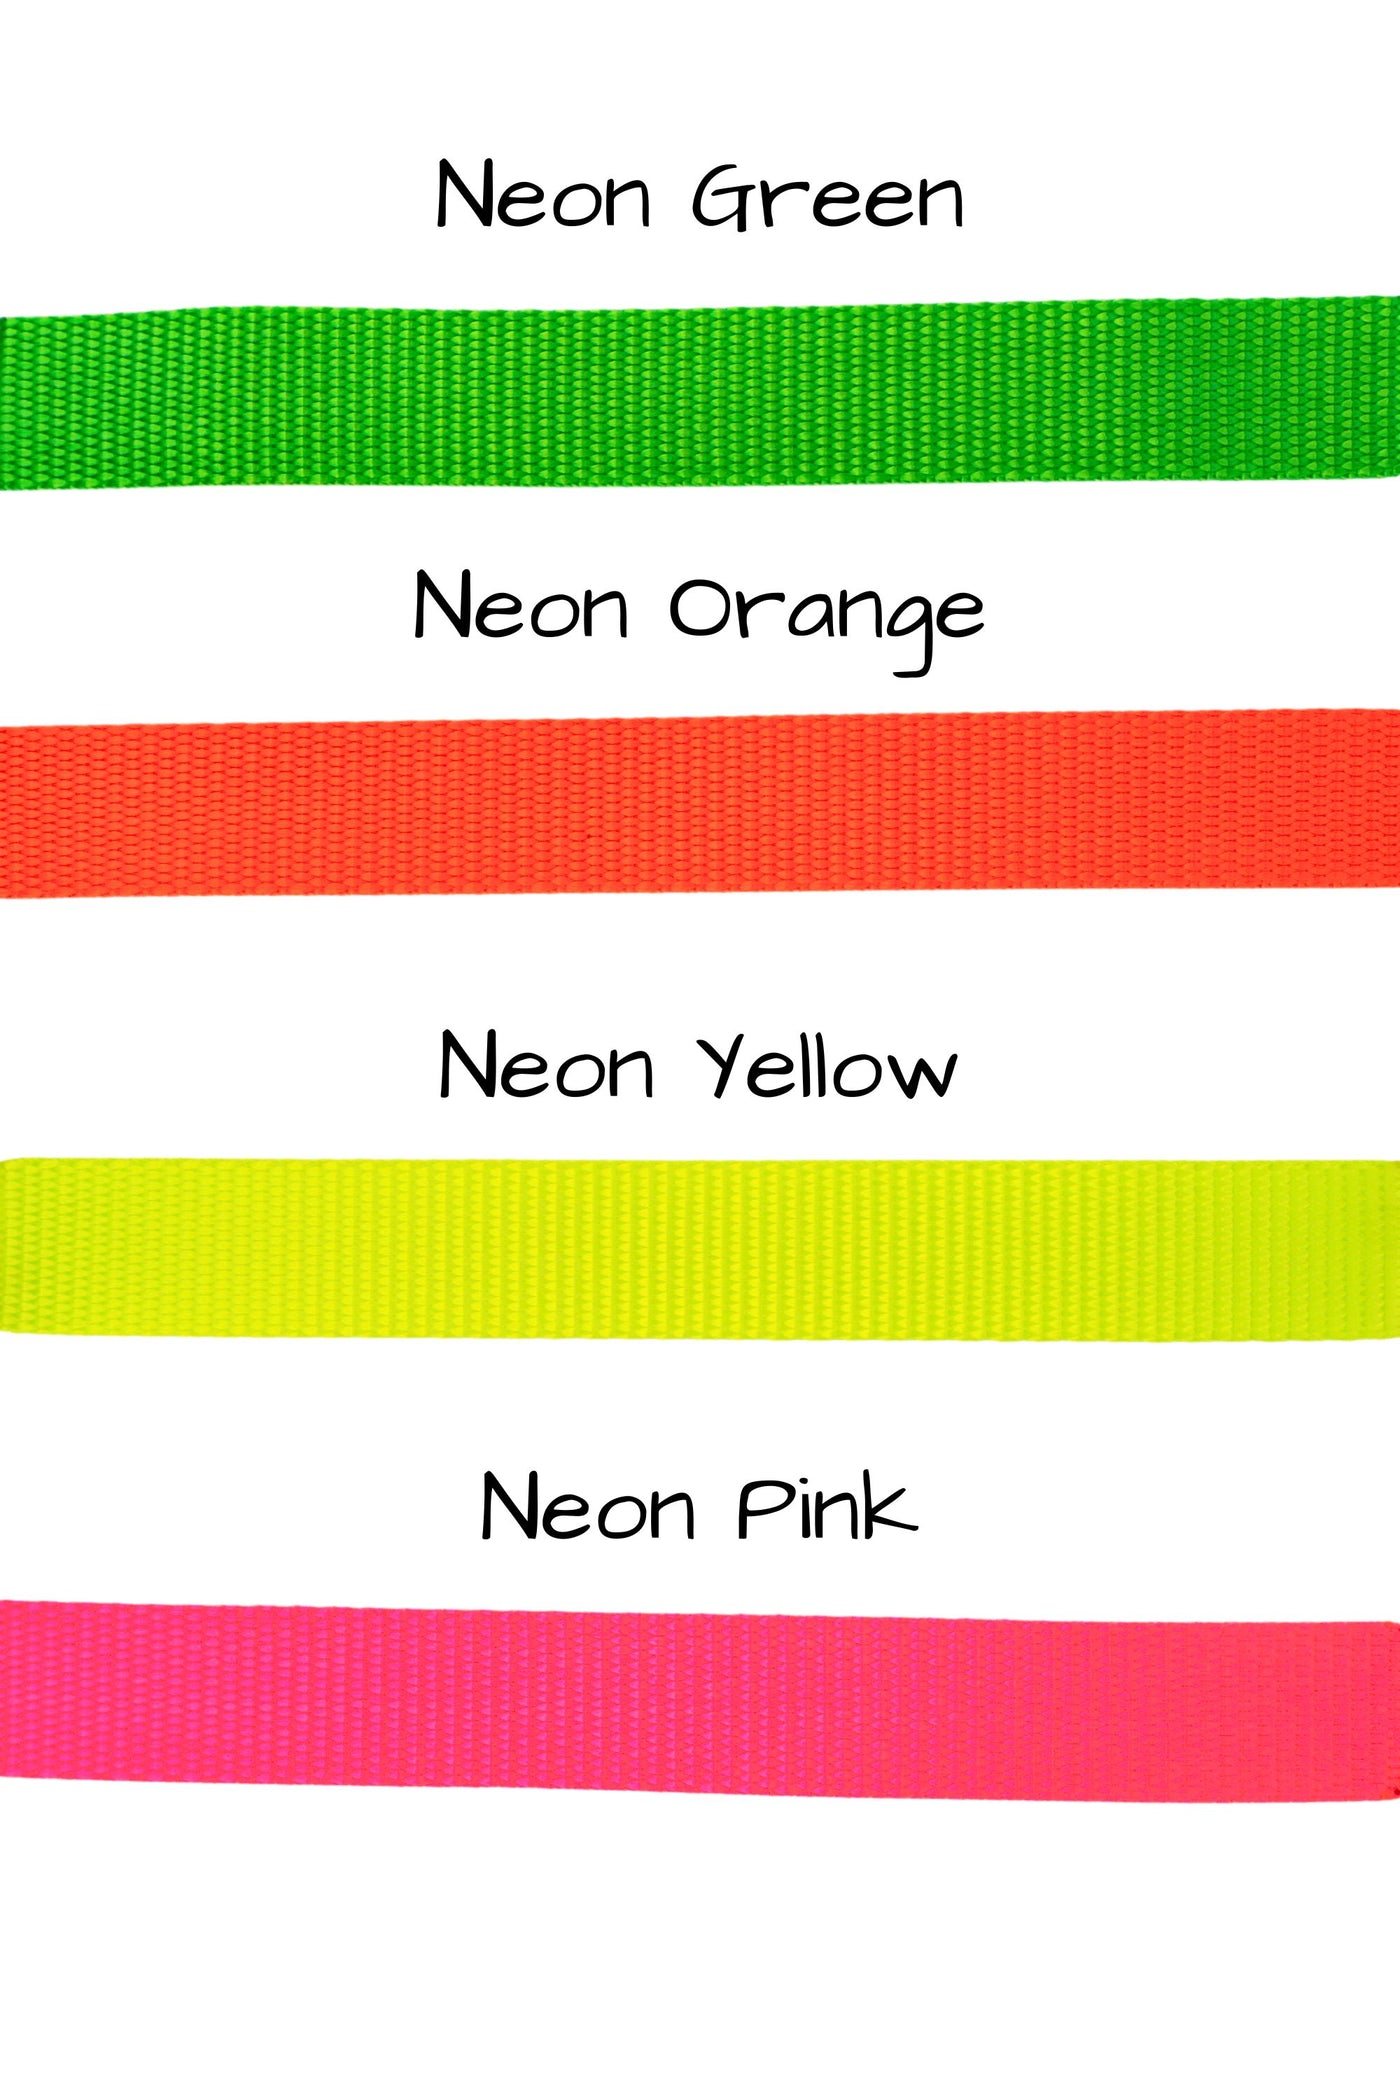 Four neon colors are available for the adjustable no-pull leashes, including neon green, neon orange, neon yellow, or neon pink.